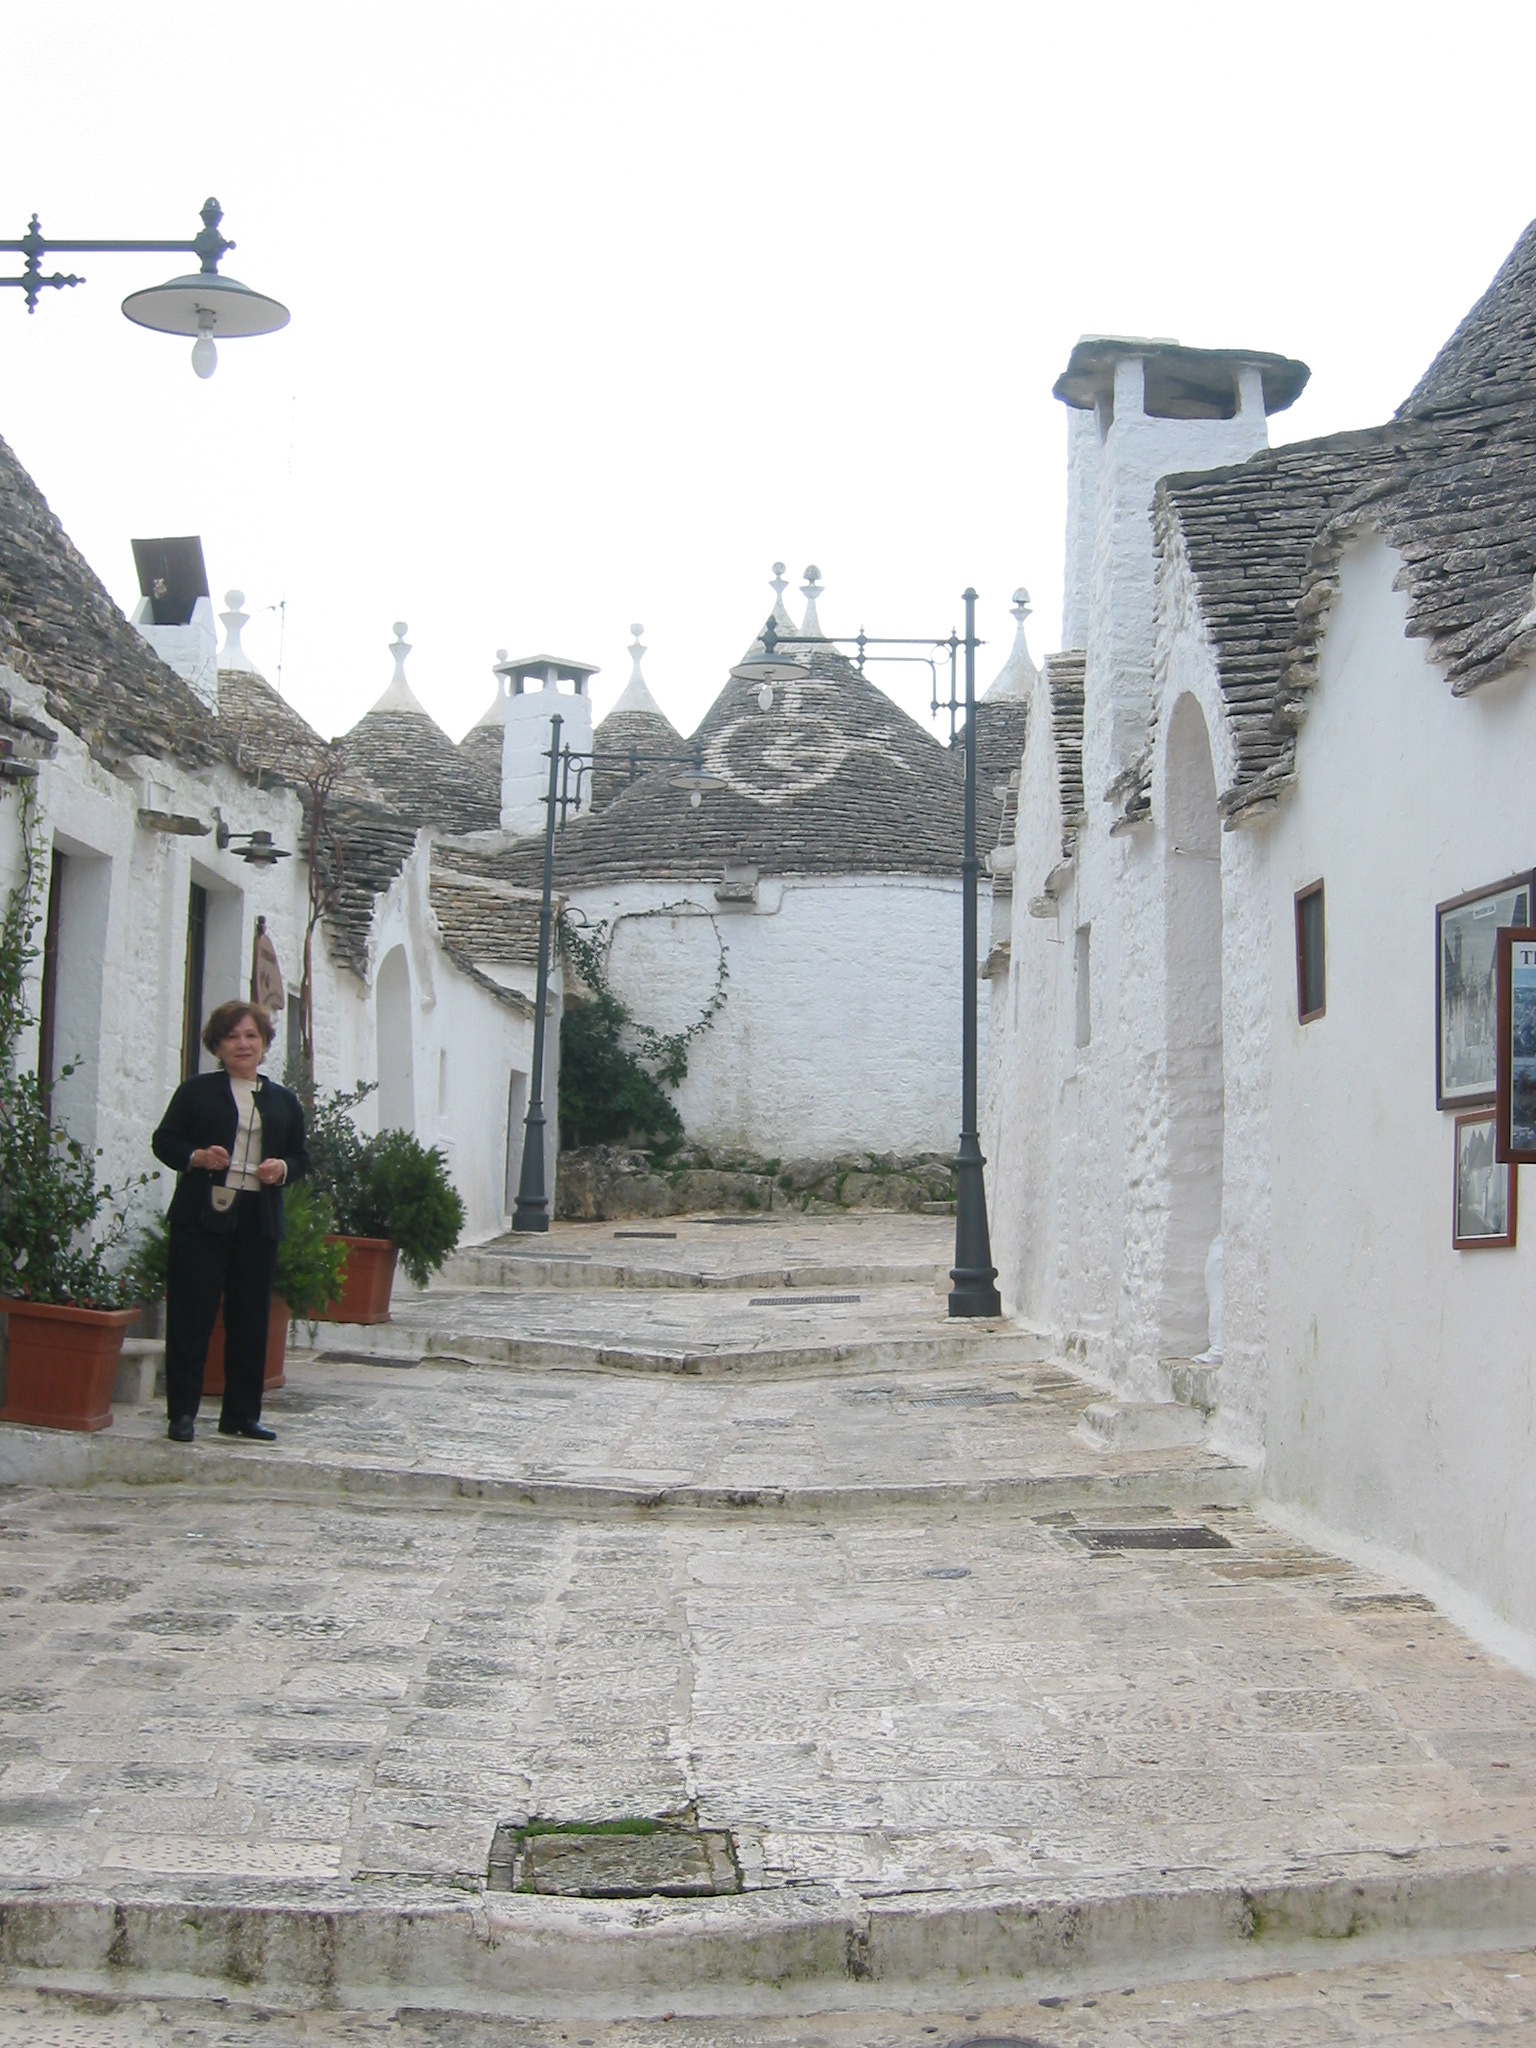 Over 1000 Trulli homes in the area